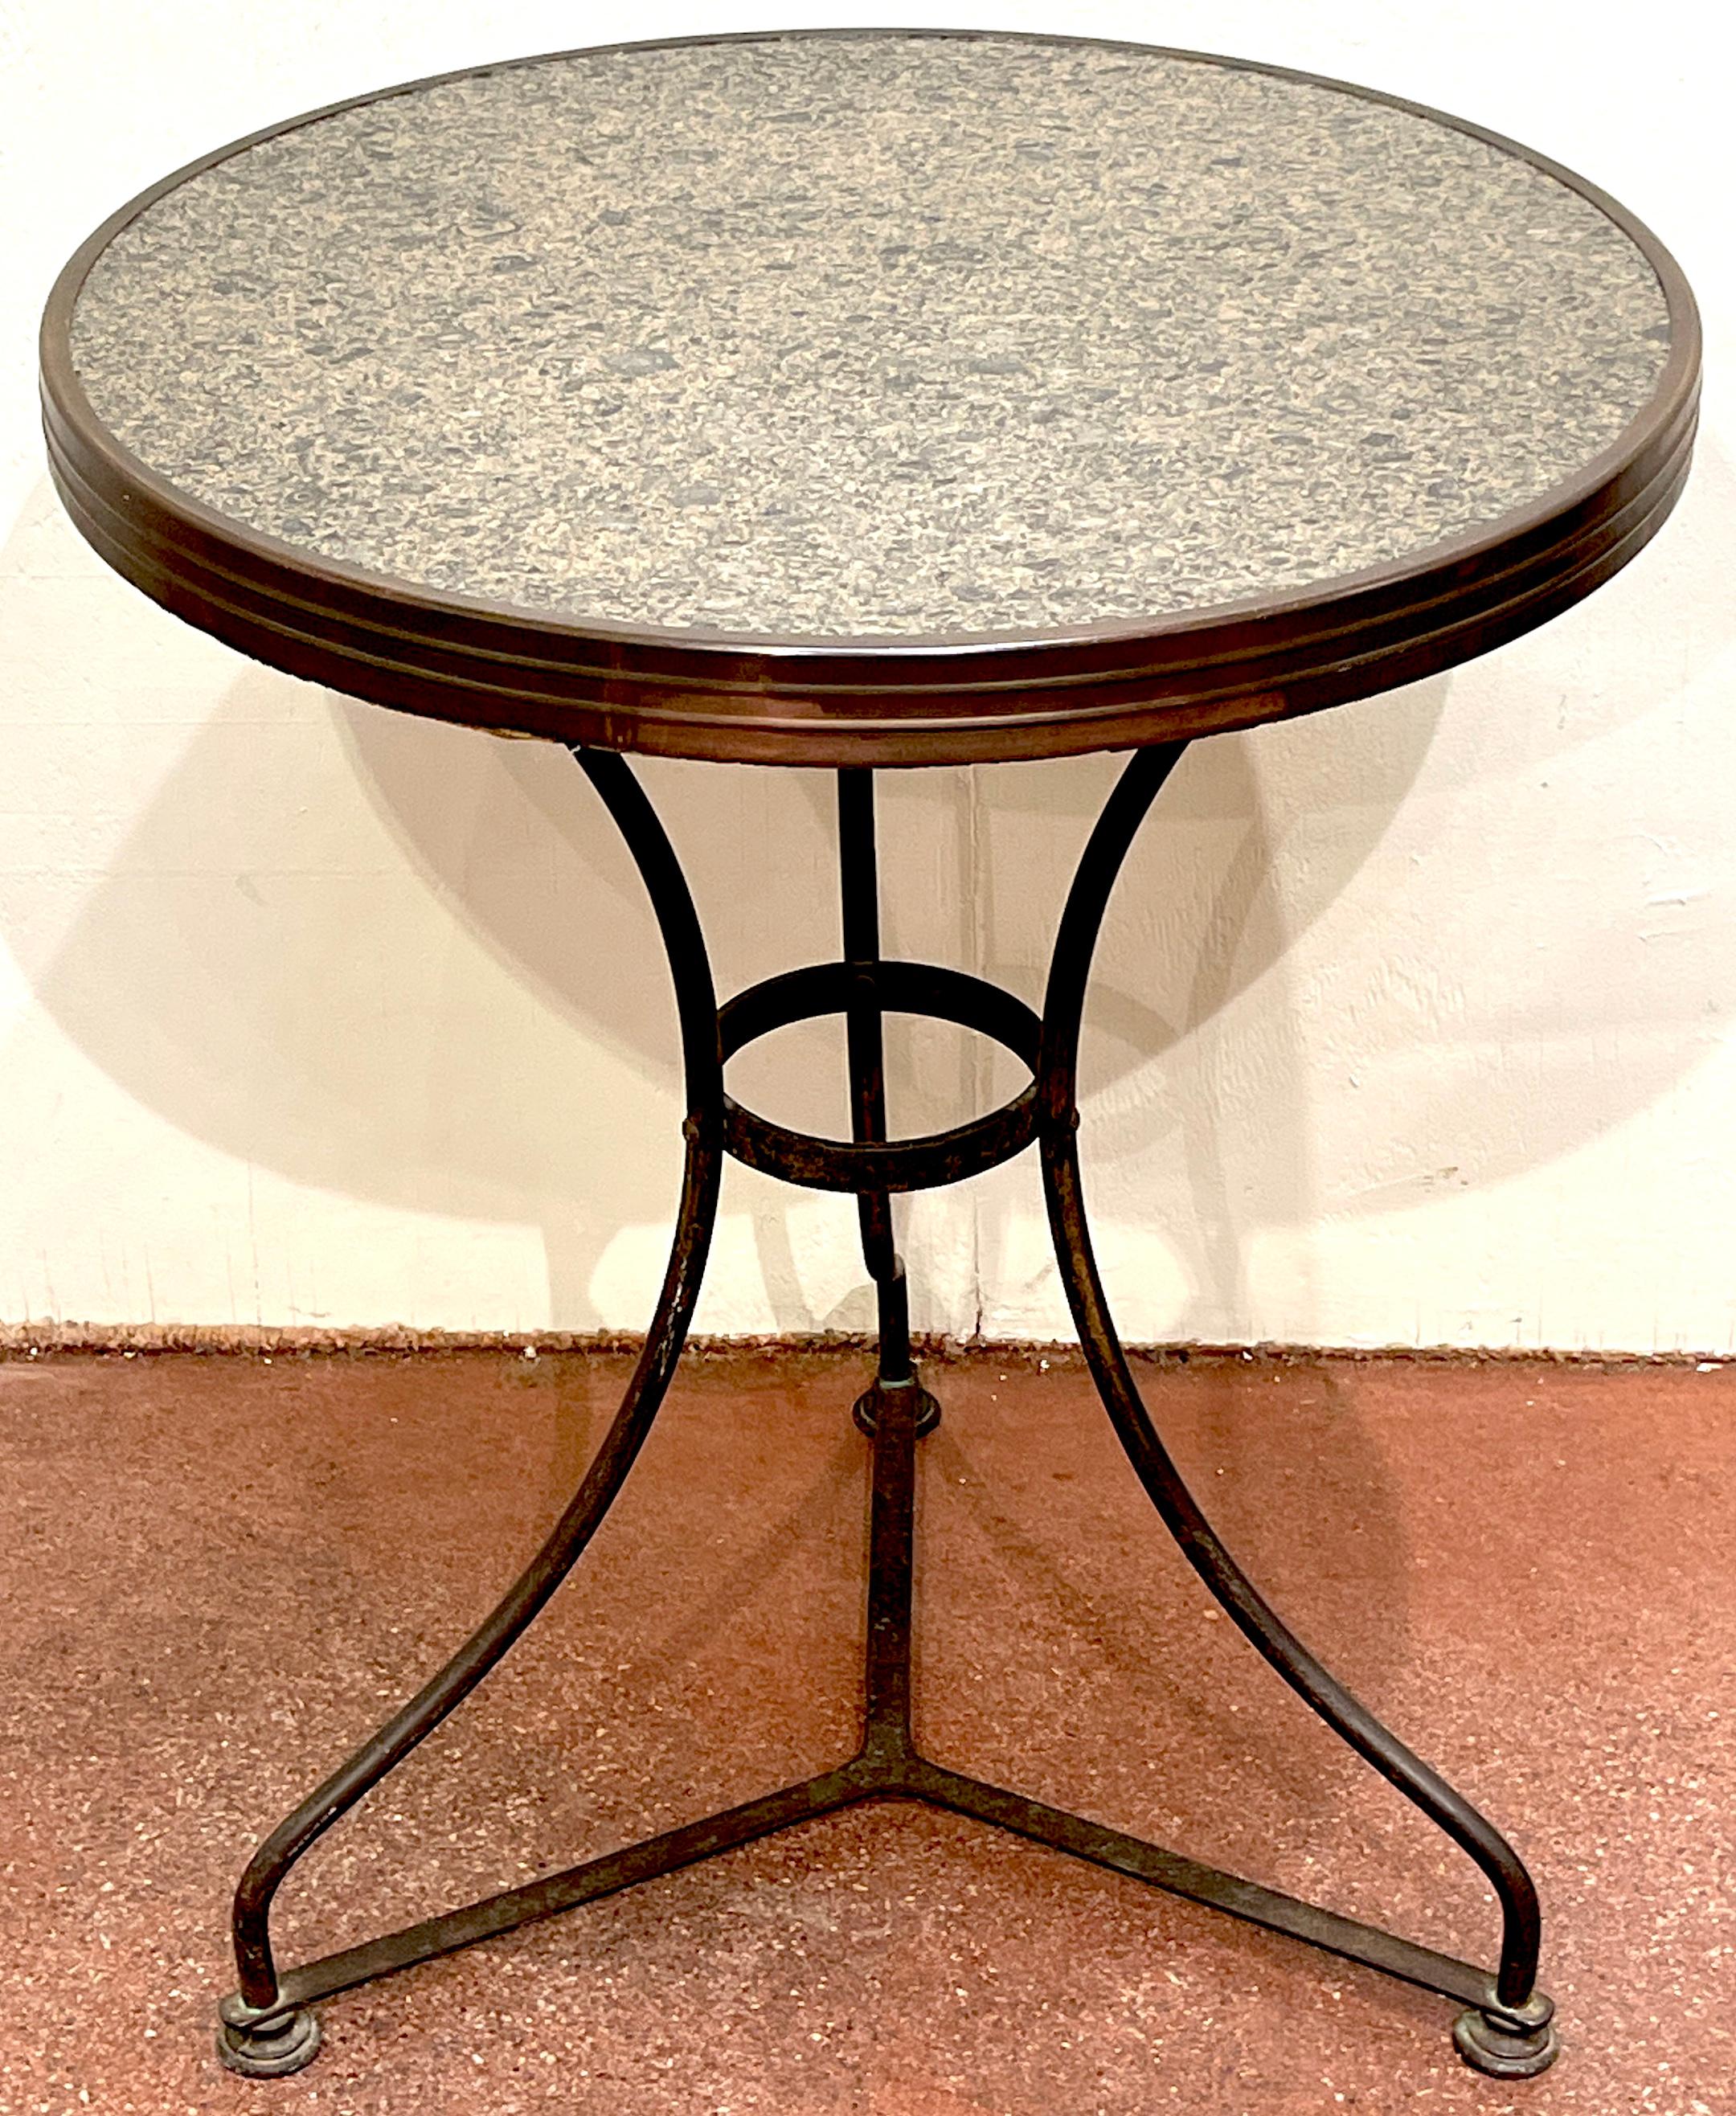 French Modern Bronze and Marble Gueridon or Bistro Table 
France, pre-World War II

A striking French modern bronze and marble gueridon dating back to the pre-World War II era. This timeless piece boasts a sleek and avant-garde design, embodying the